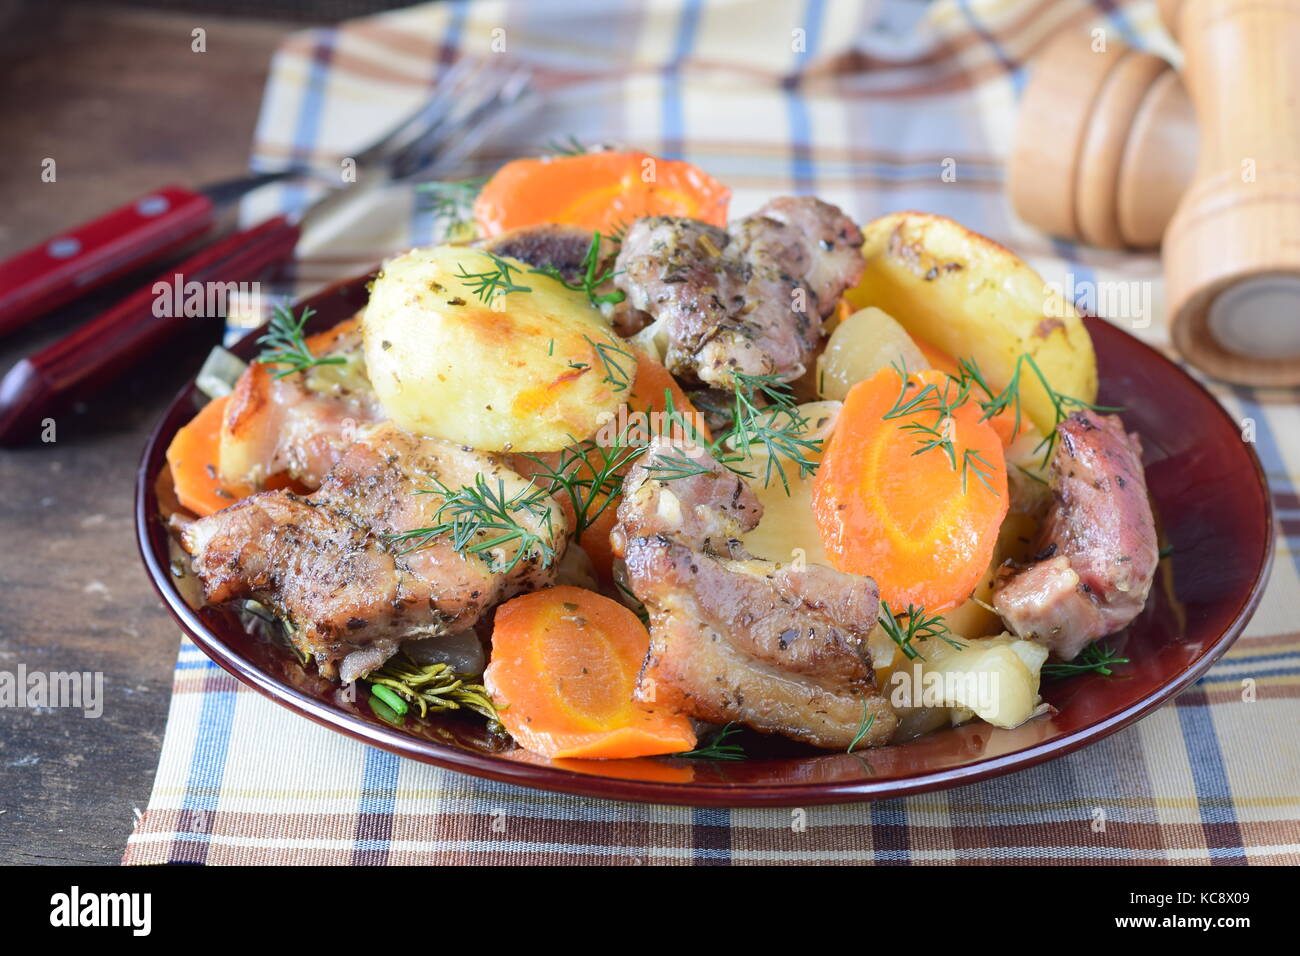 Oven cooked pork with potato, carrots and onion in olive oil and spices in a brown ceramic plate on a wooden background. Home cooking Stock Photo